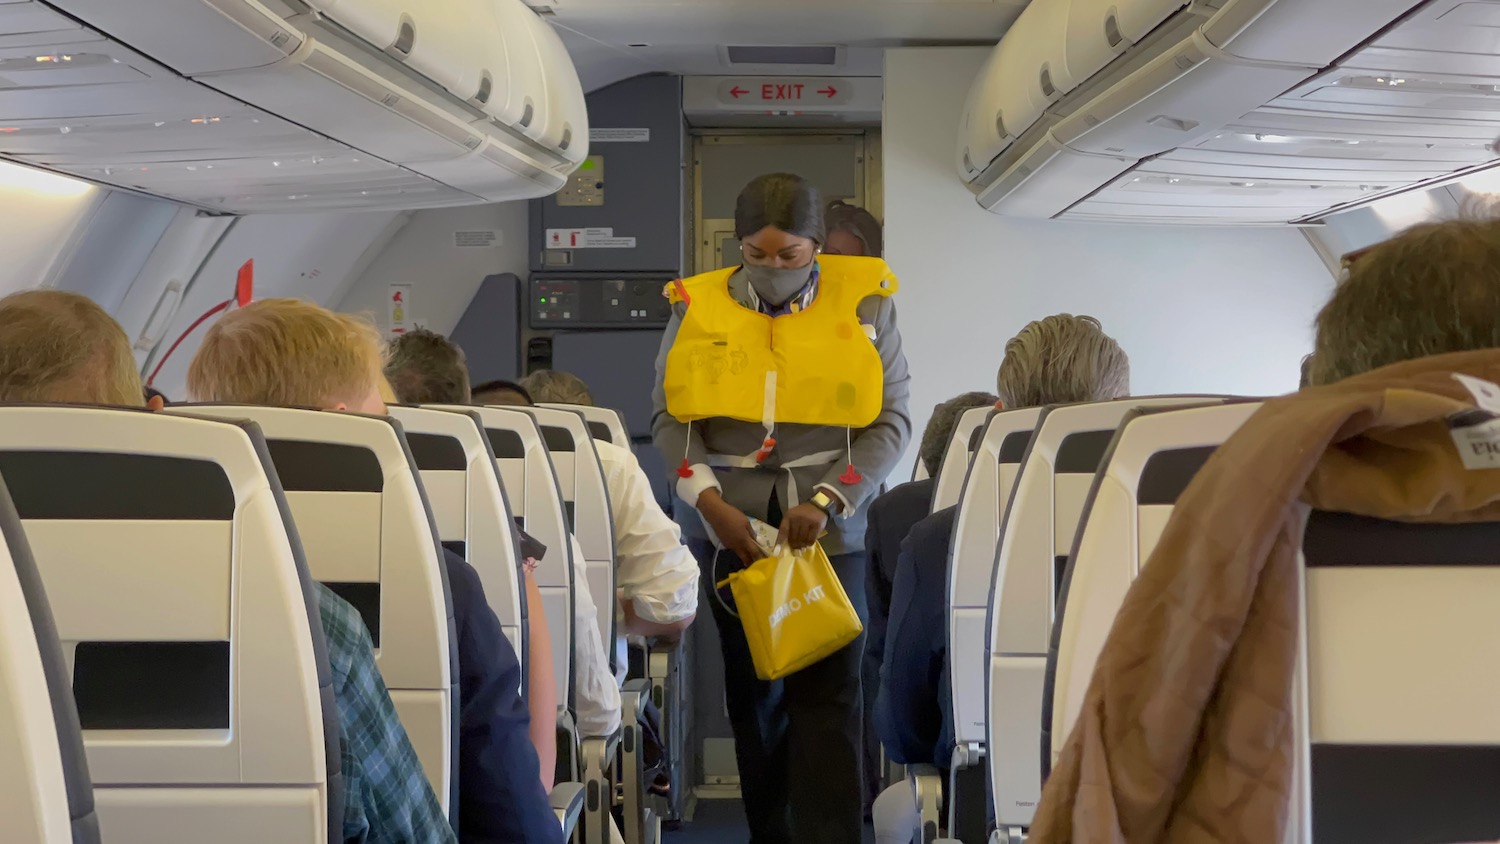 a person wearing a mask and a yellow life jacket standing in an airplane